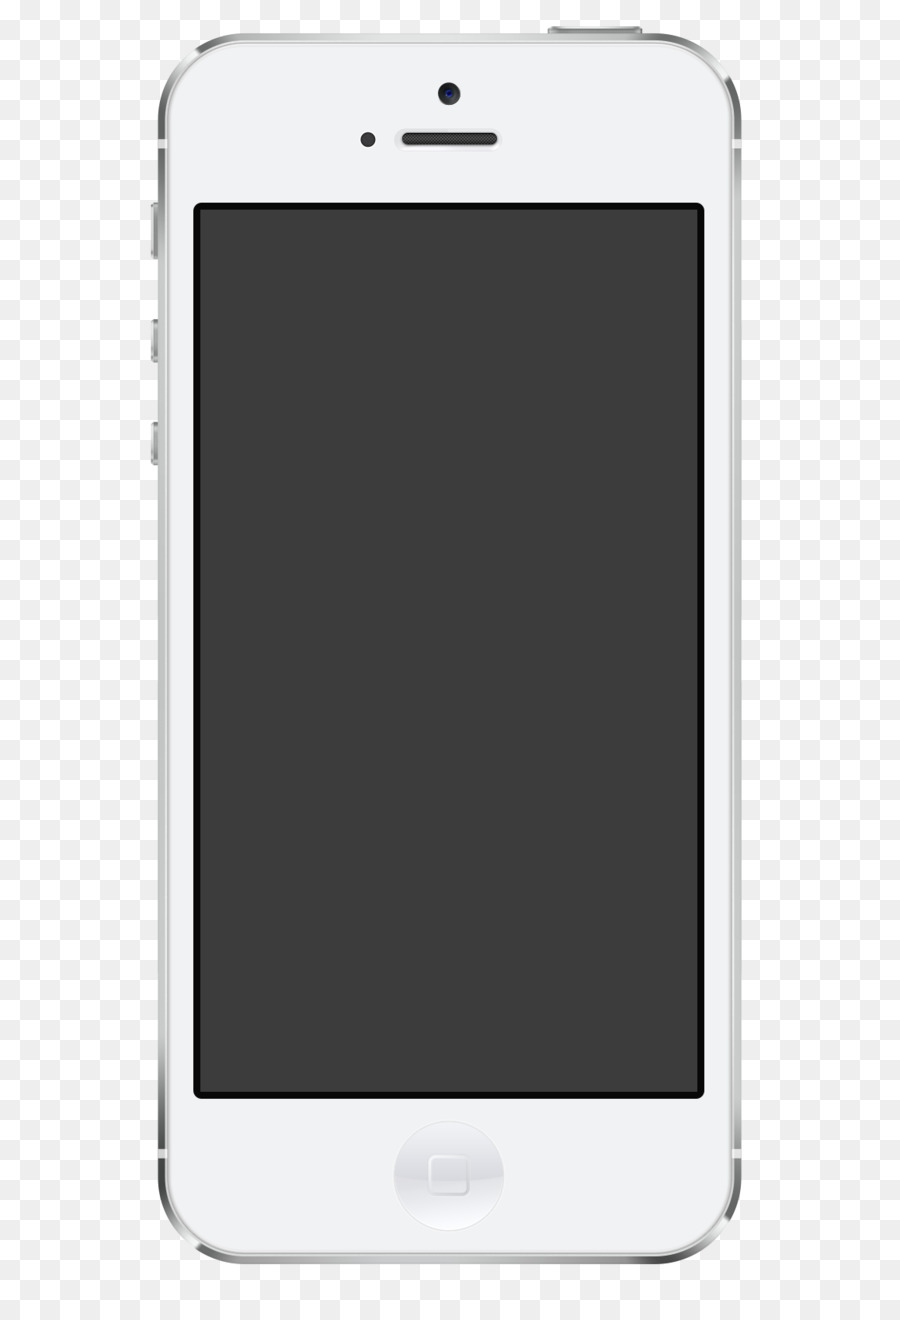 S x face id. Cellphone clipart iphone 6